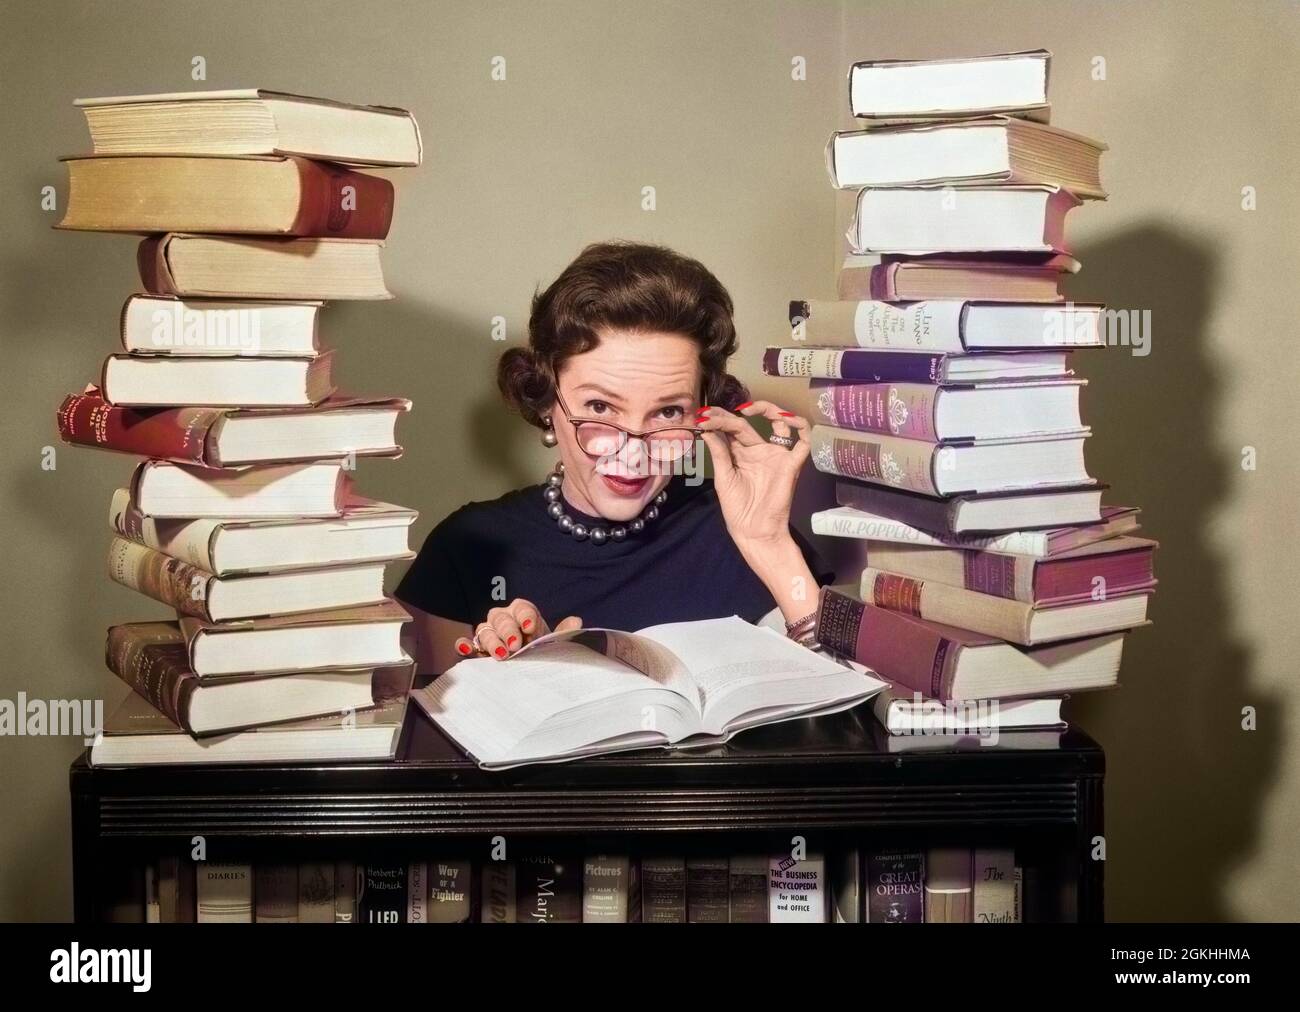 1950s WOMAN LIBRARIAN SITTING BETWEEN STACKS OF BOOKS PULLING DOWN GLASSES TO LOOK OVER RIMS LOOKING AT CAMERA - r843c DEB001 HARS READ OLD FASHION 1 FACIAL COMMUNICATION CAREER YOUNG ADULT INFORMATION WEAR LIFESTYLE FEMALES JOBS GROWNUP COMMUNICATING HORIZONTAL COPY SPACE LADIES MASS PERSONS PROFESSION EYEGLASSES B&W MASS MEDIA EYE CONTACT RELEASES PROFESSOR SKILL OCCUPATION OPTICAL SKILLS HEAD AND SHOULDERS LITERATE EYE WEAR CAREERS KNOWLEDGE RESEARCHER BETWEEN EMPLOYMENT OCCUPATIONS READER STACKS DEB001 EMPLOYEE RIMS COMMUNICATE COMMUNICATIONS MID-ADULT MID-ADULT WOMAN QUESTIONING STUDIOUS Stock Photo